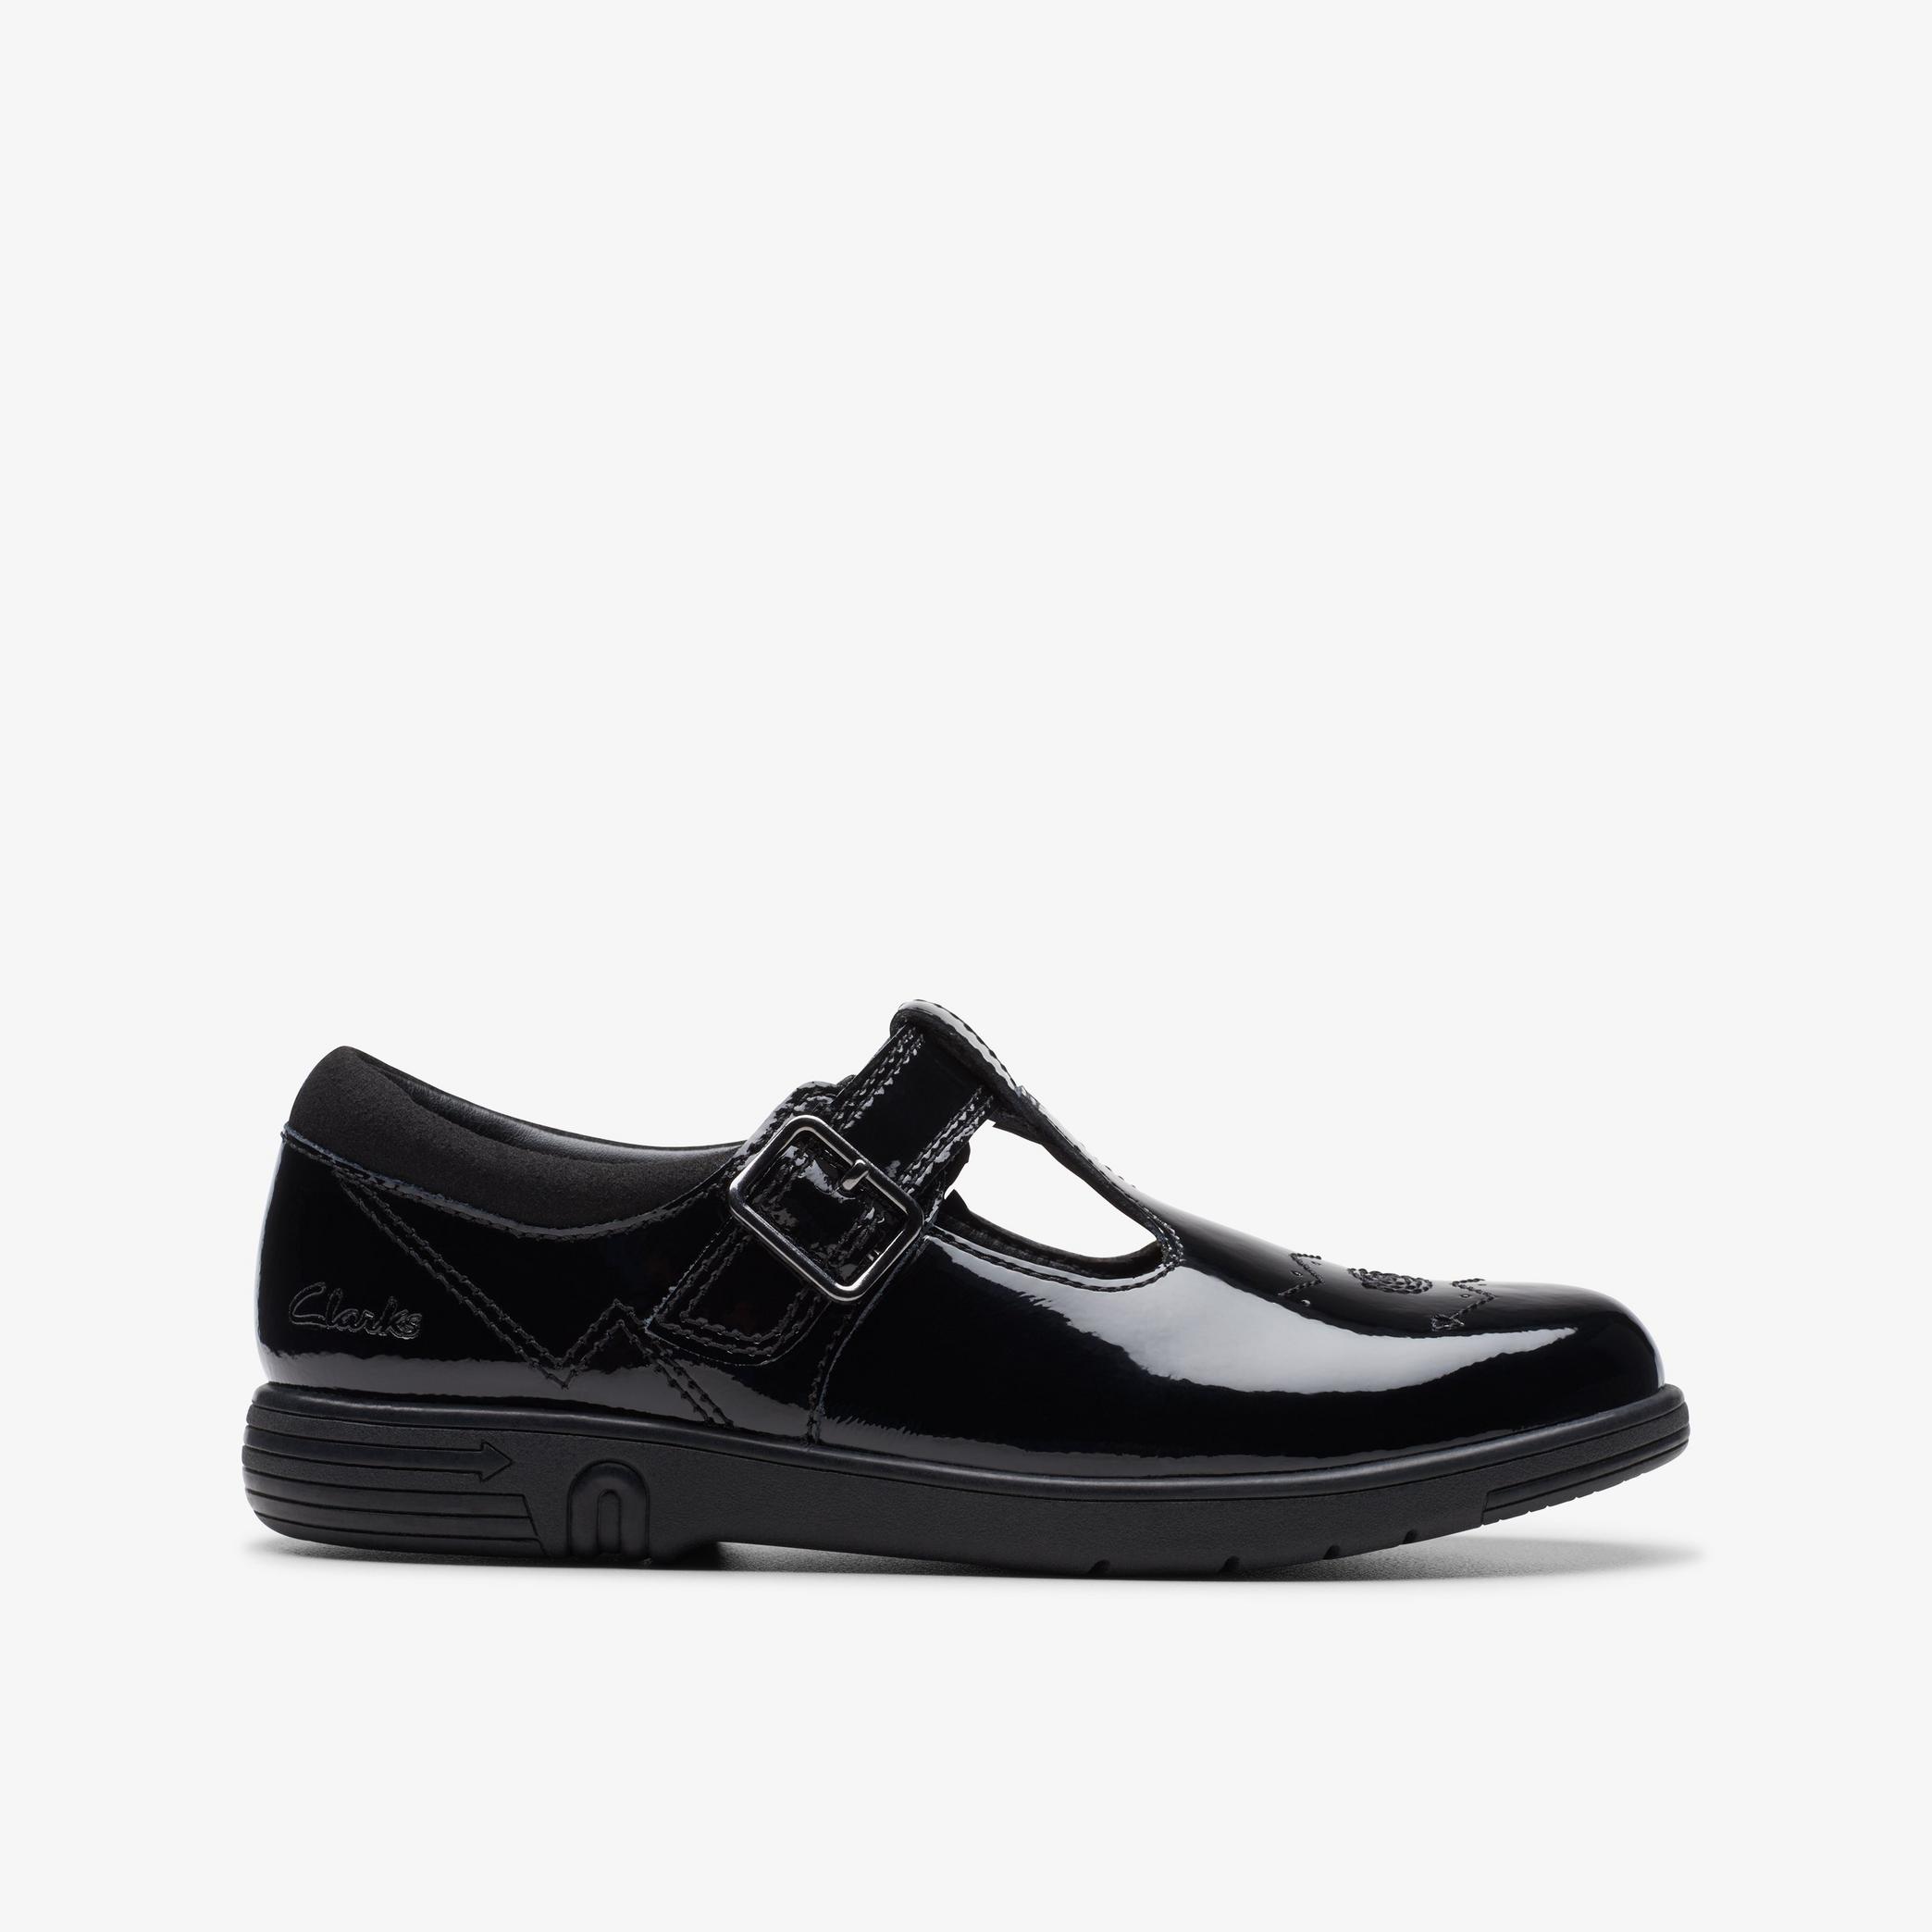 Jazzy Tap Kid Black Patent Shoes, view 1 of 6